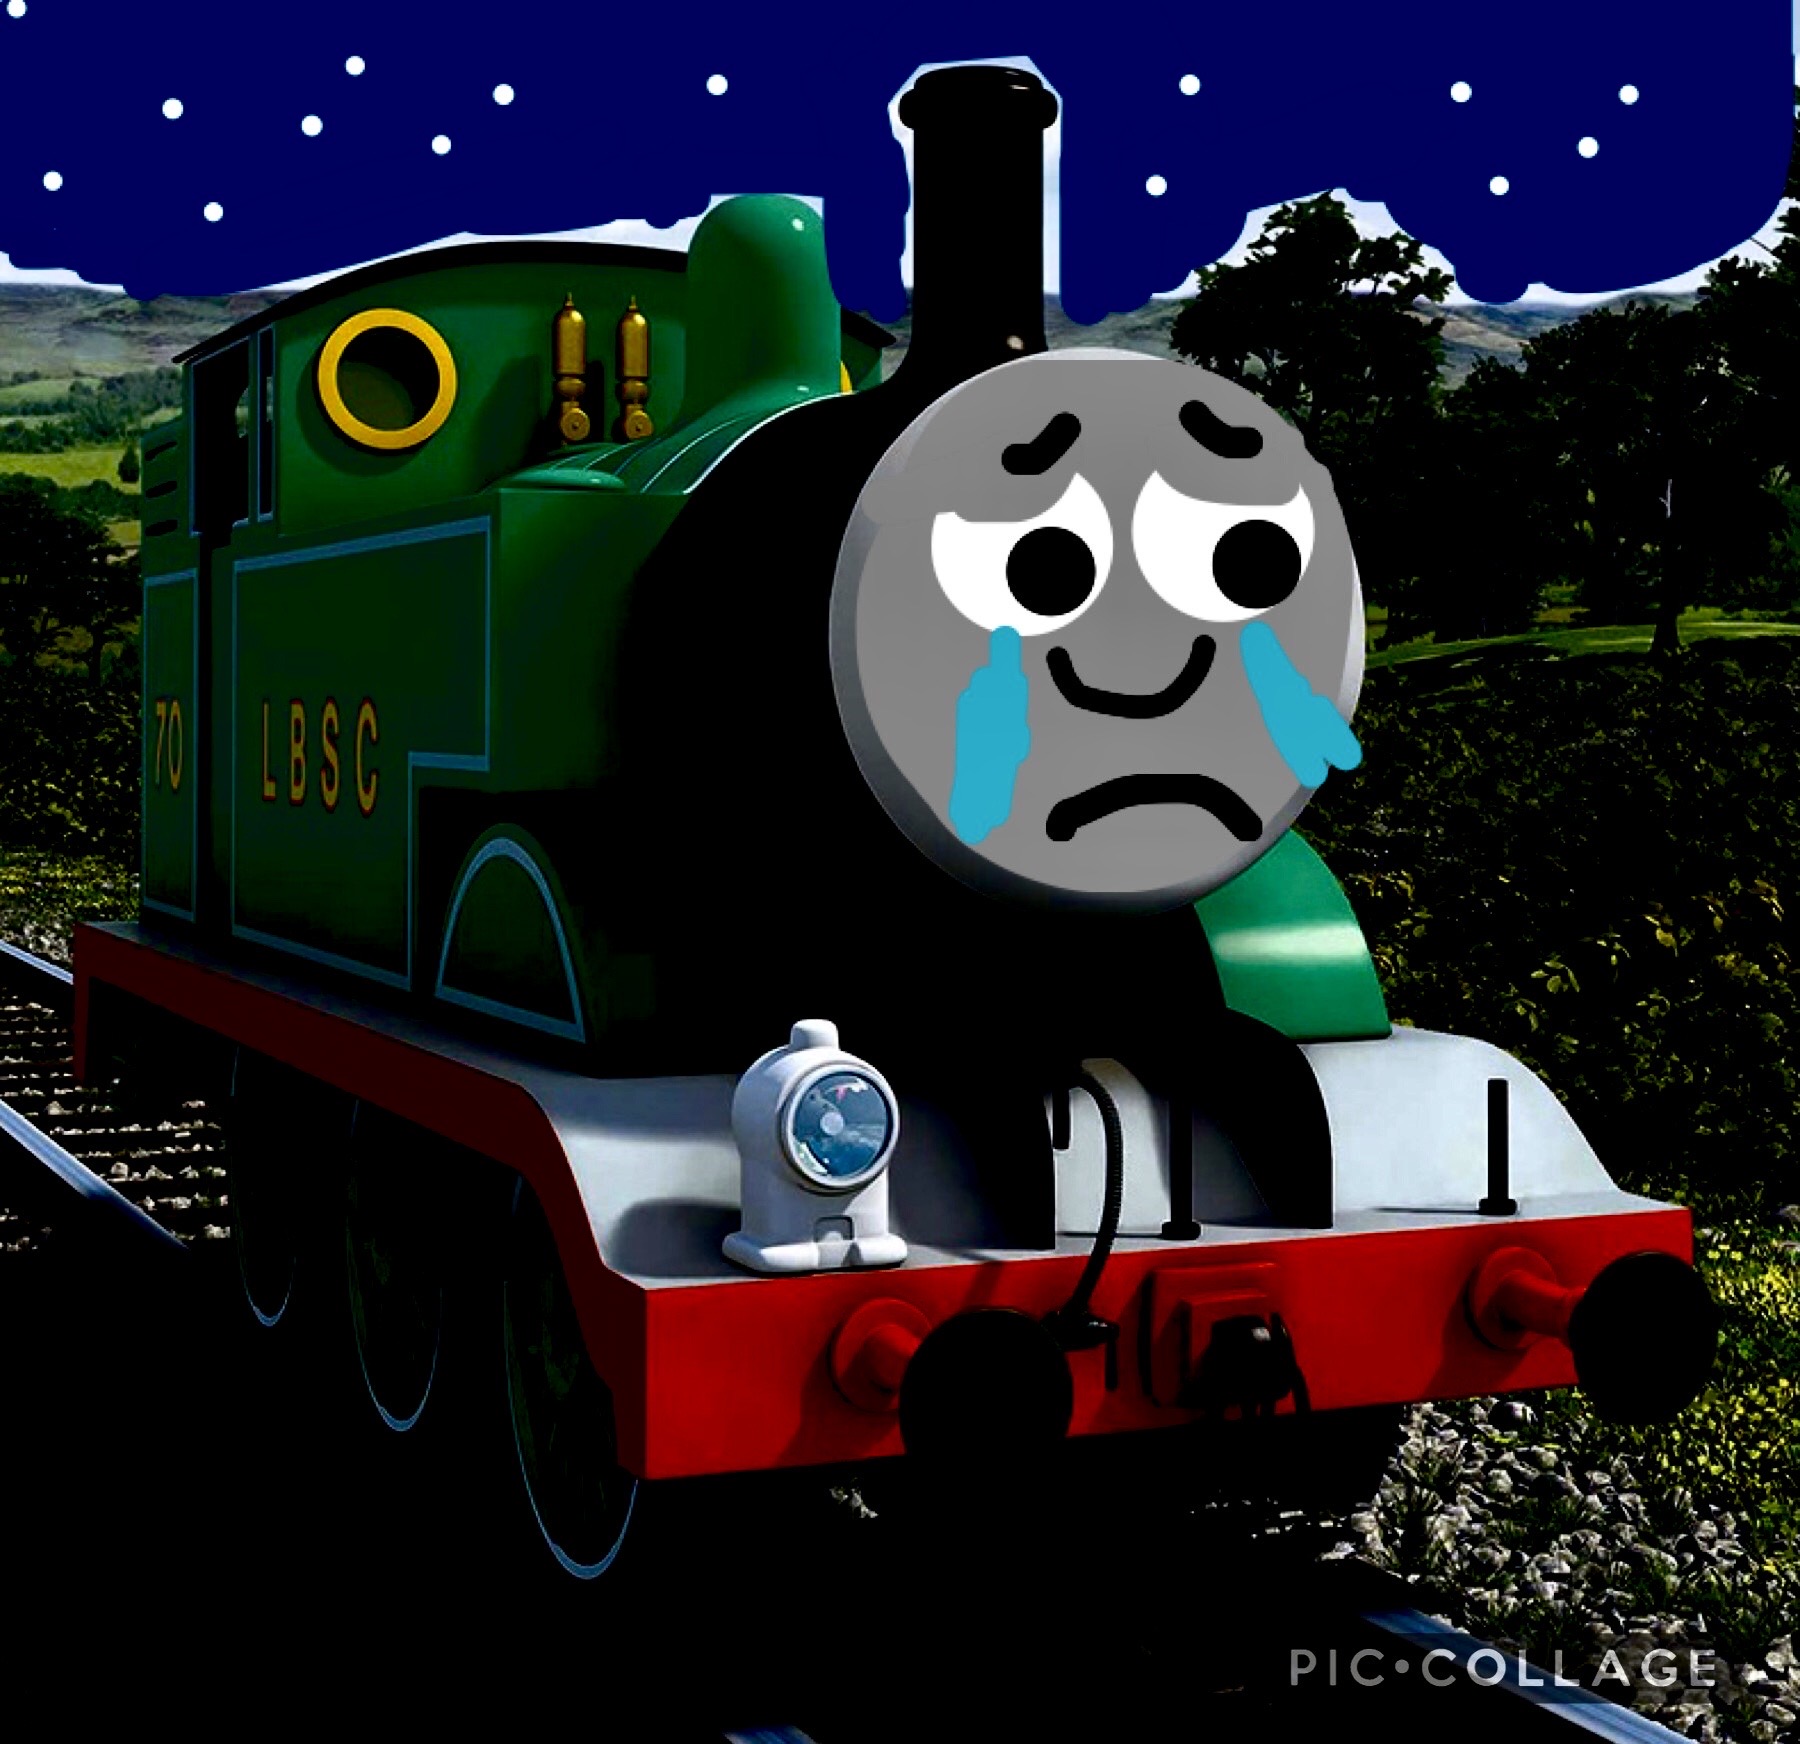 thomas the tank engine on fire as the 4 horsemen of